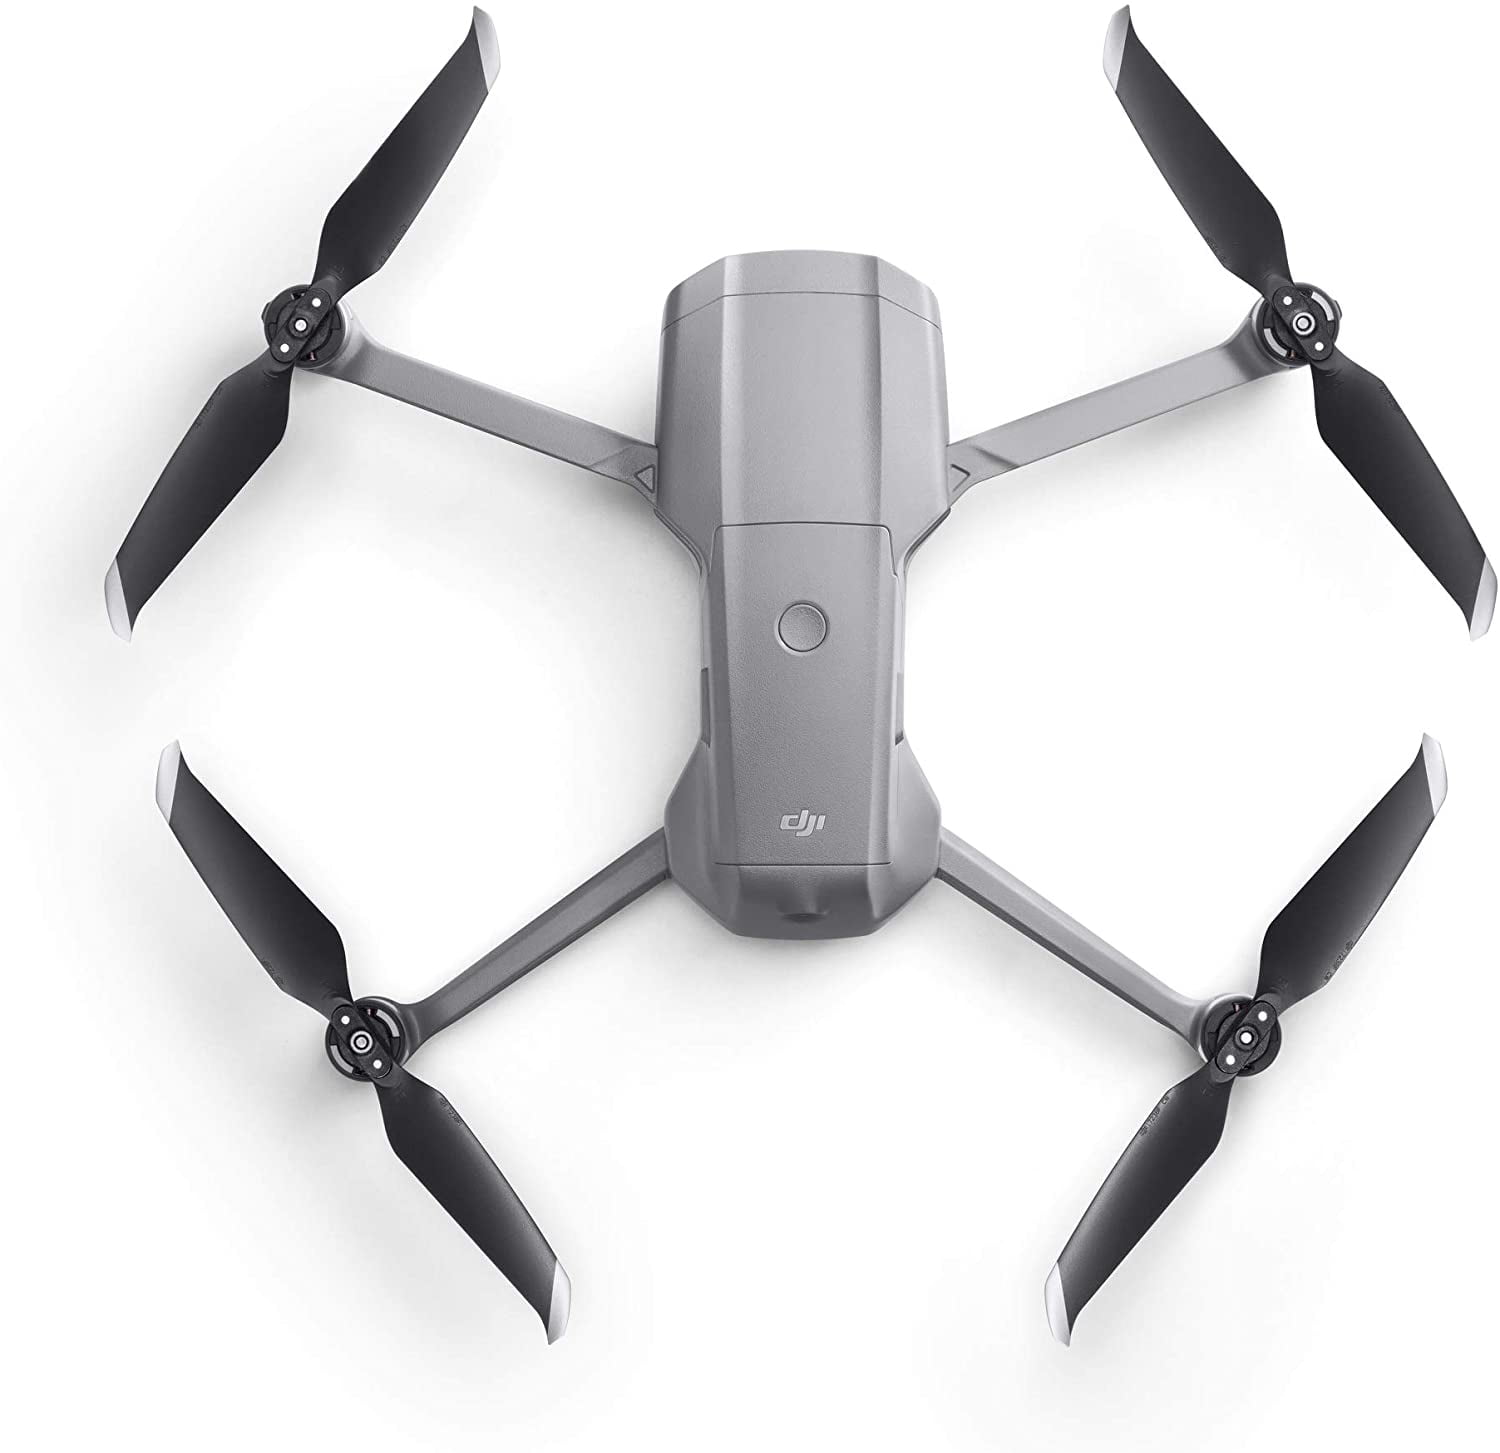 DJI Mavic Air 2 Fly More Combo - Drone Quadcopter UAV with 